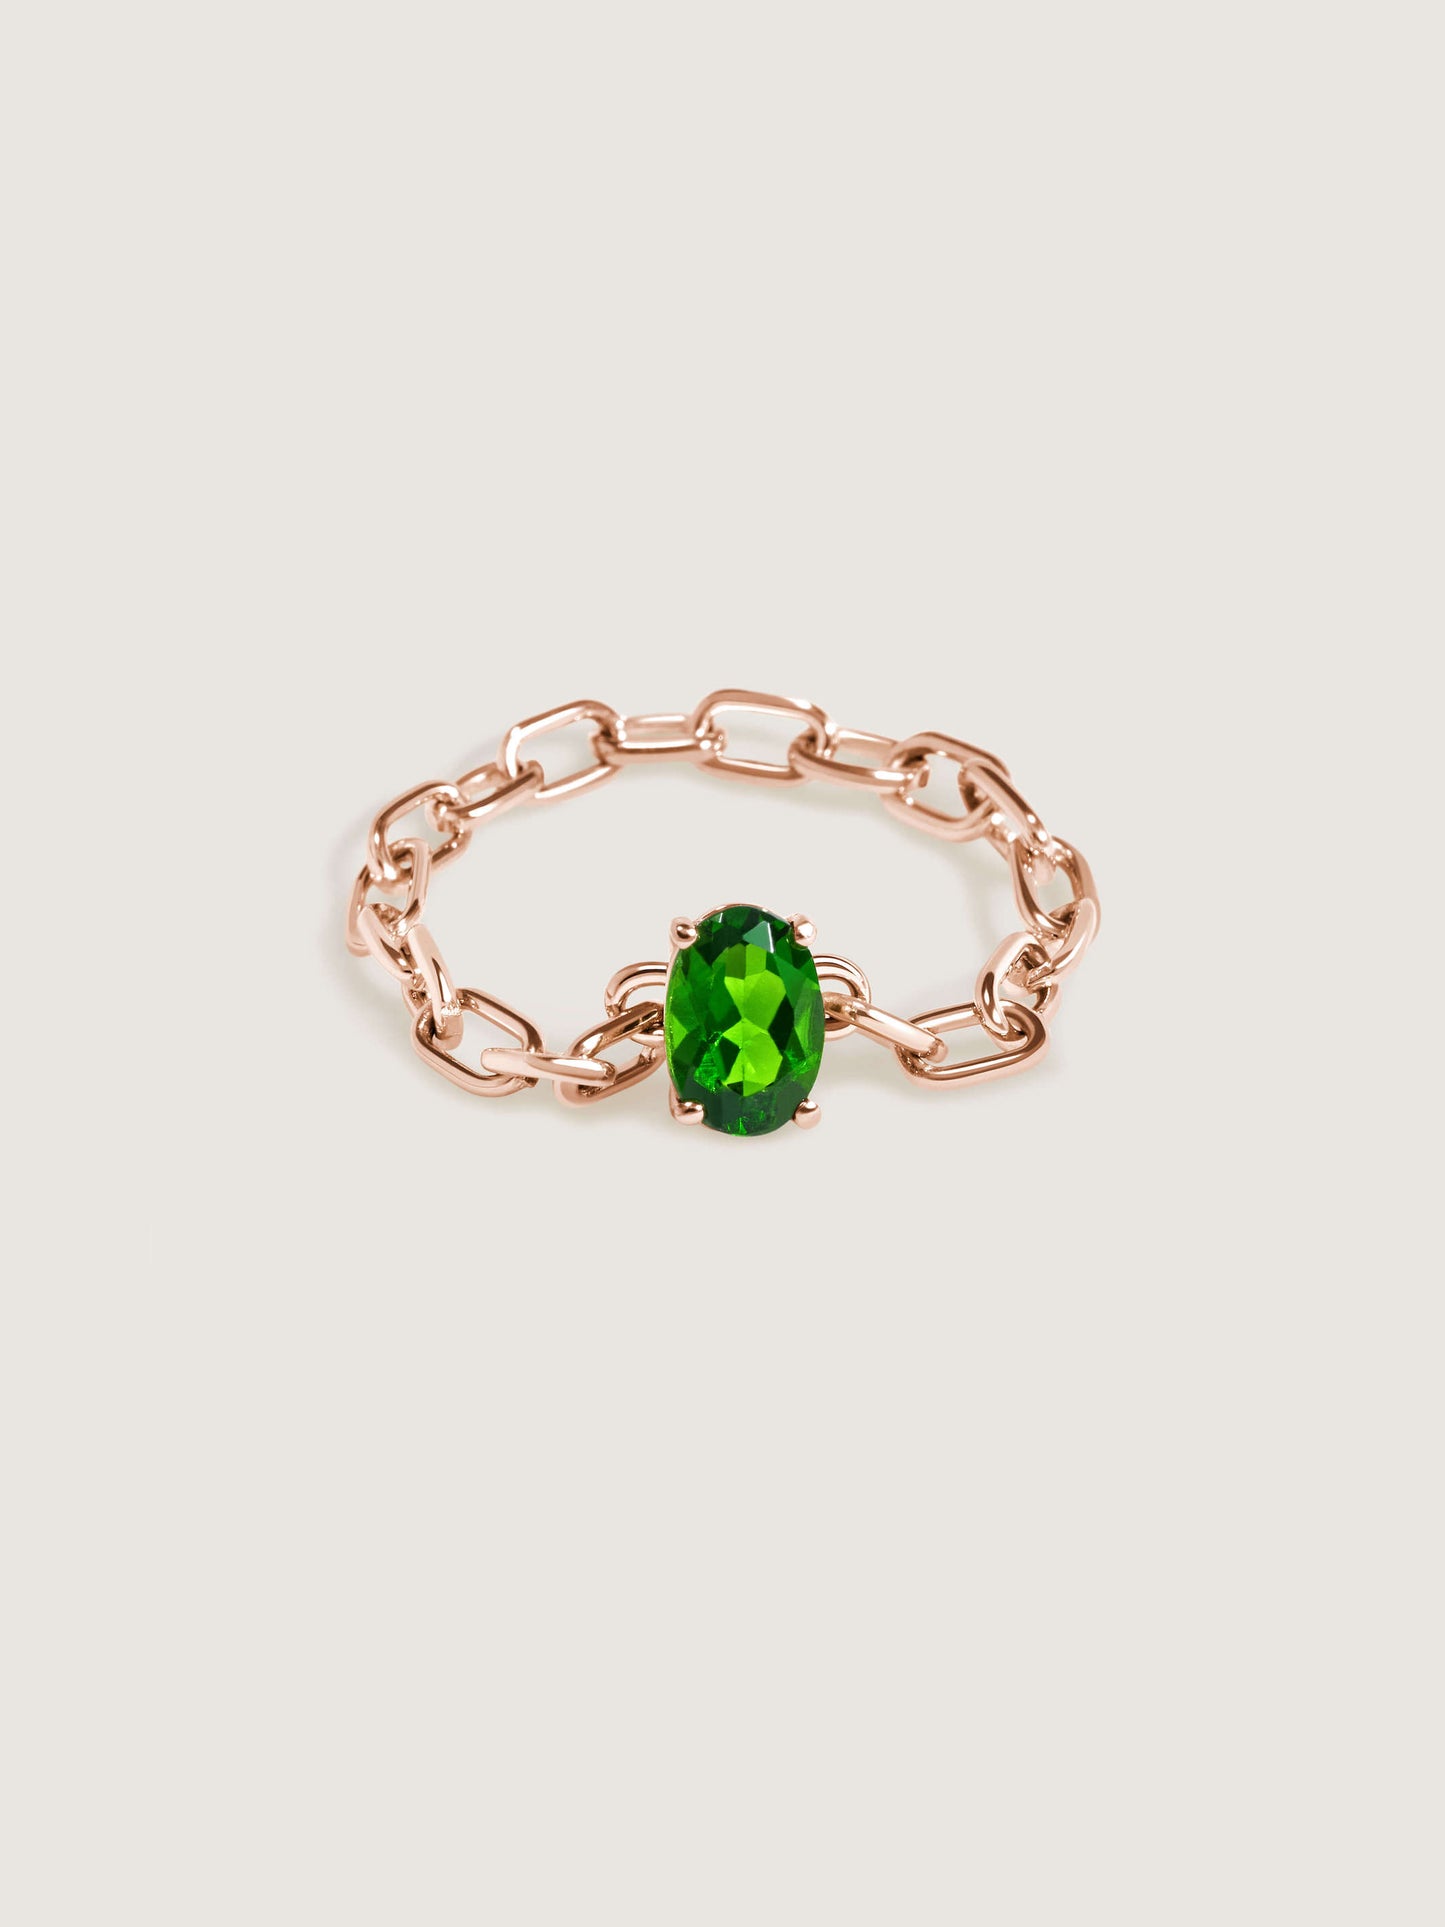 Catena Chain Ring with Chrome Diopside Gemstone